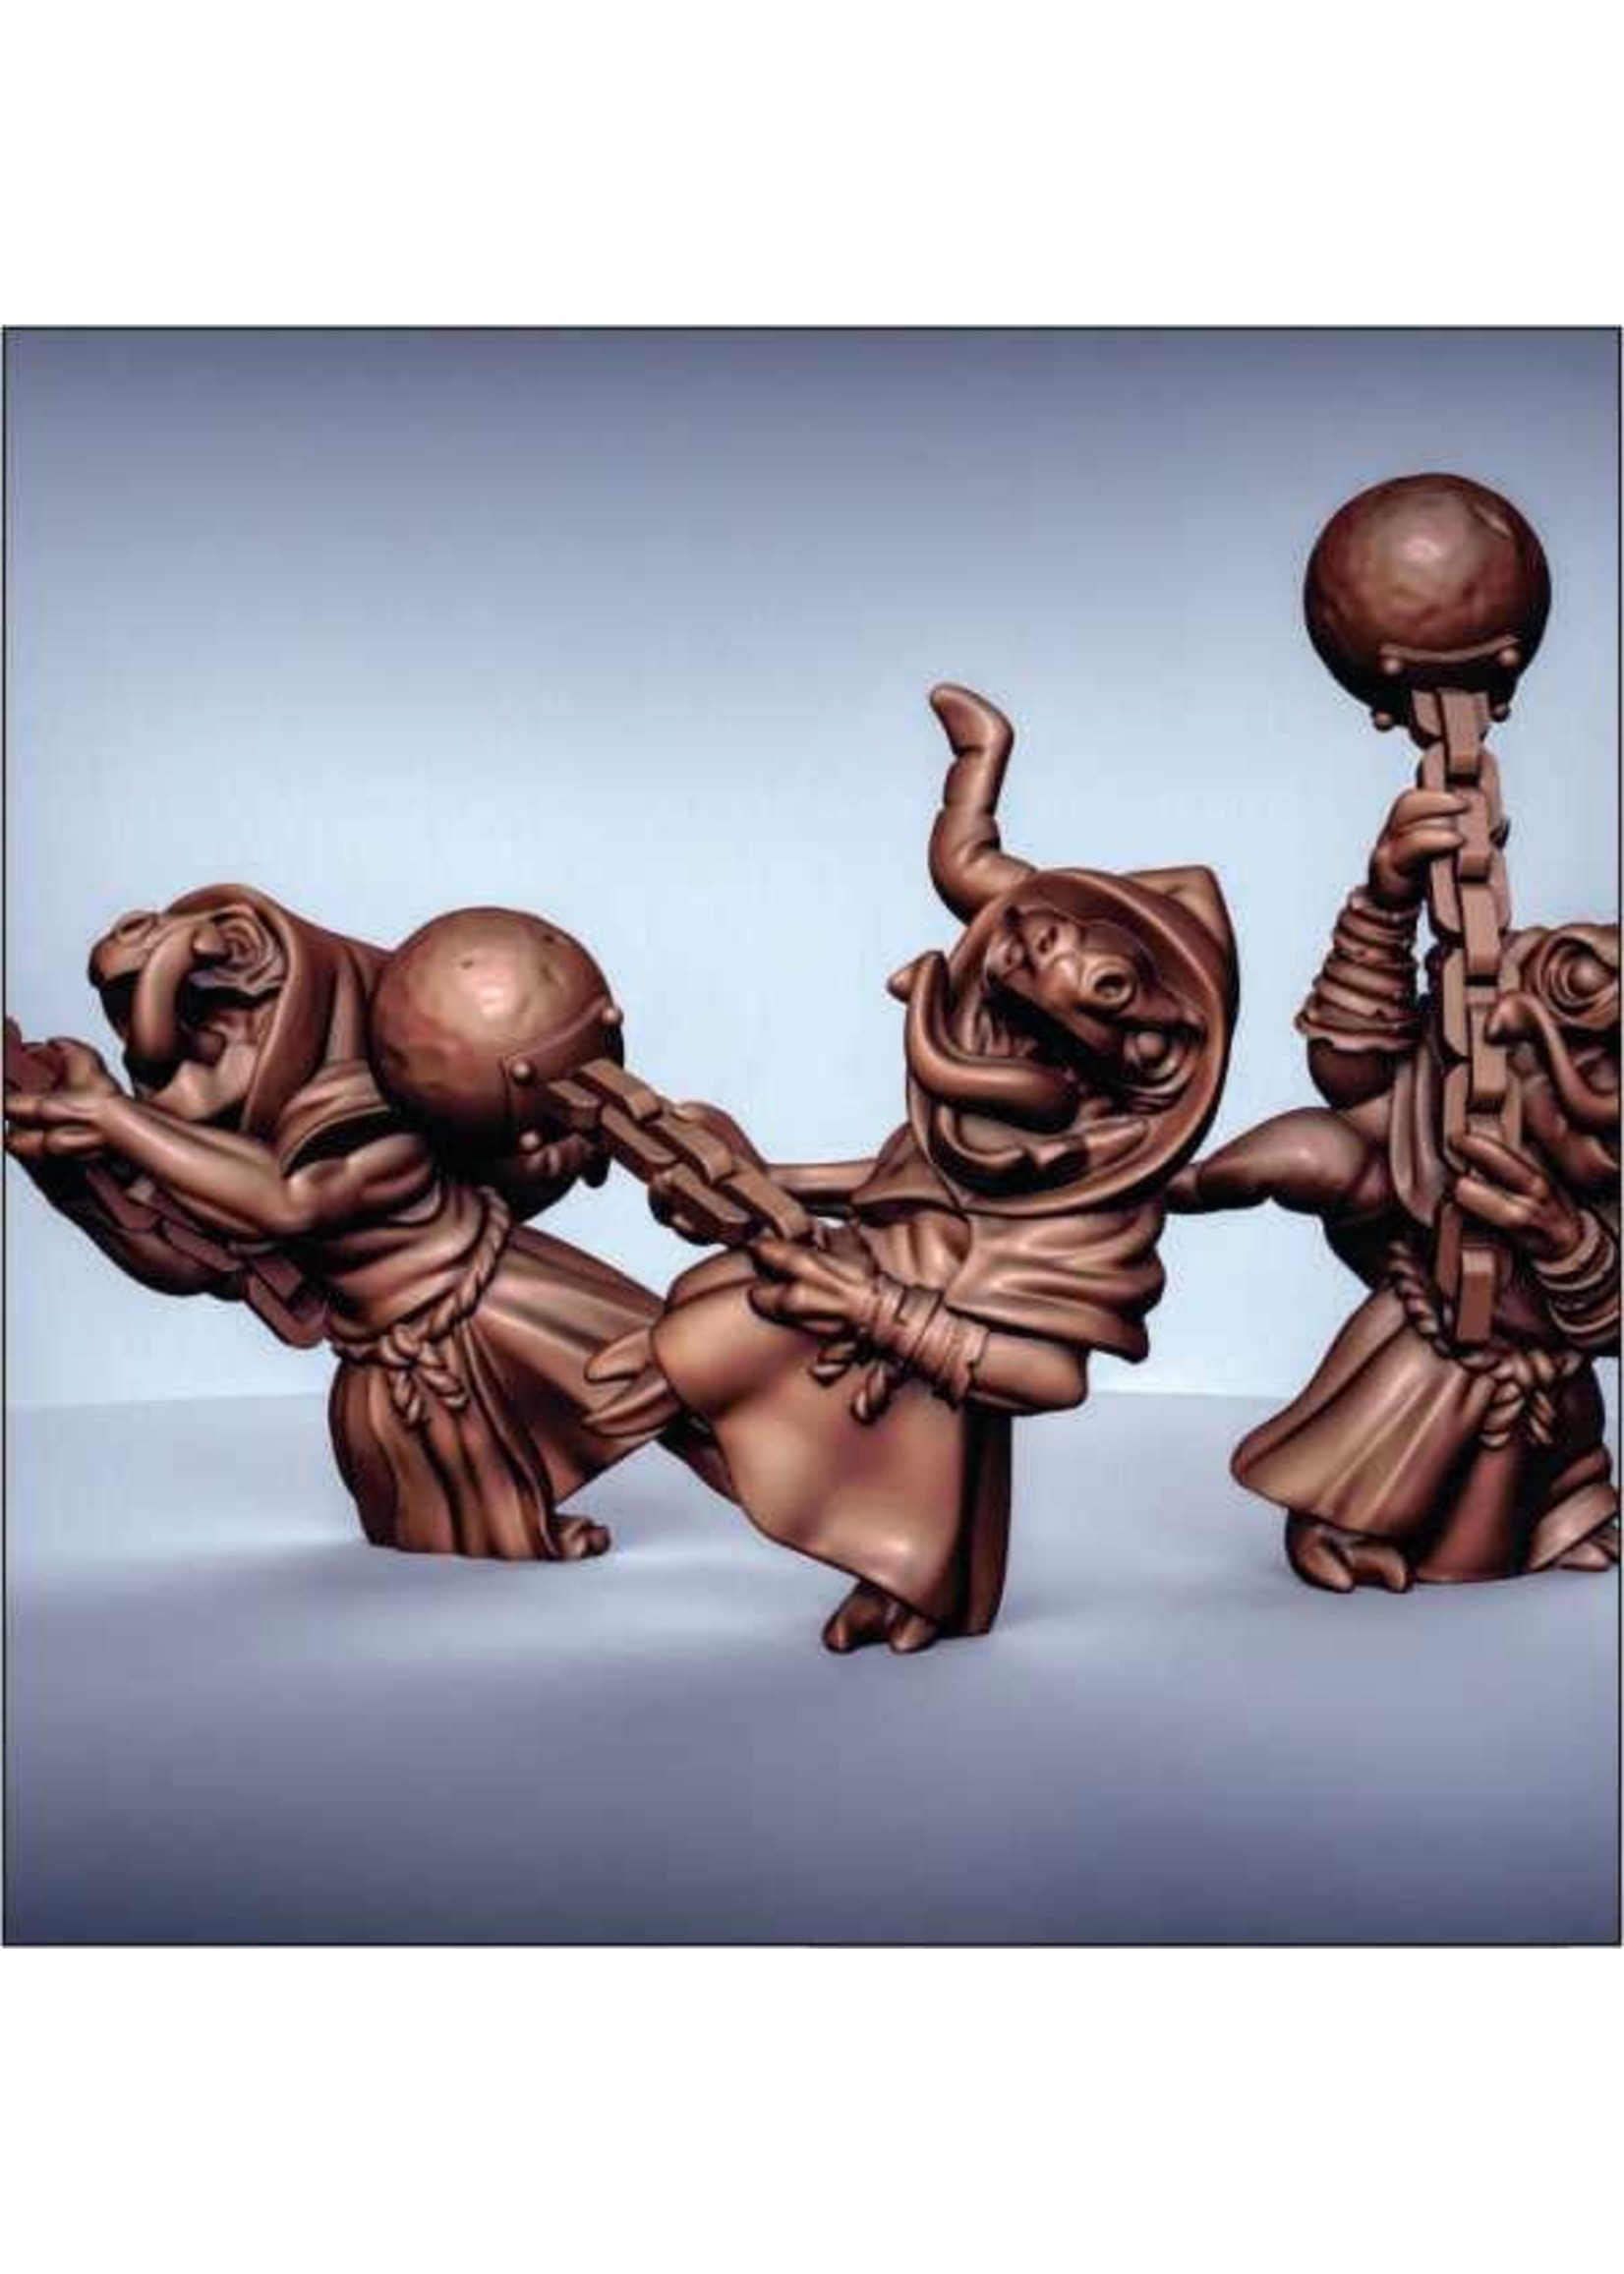 Duncan Shadow Duncan Shadow - Kobolds with Ball and Chain 3-pack